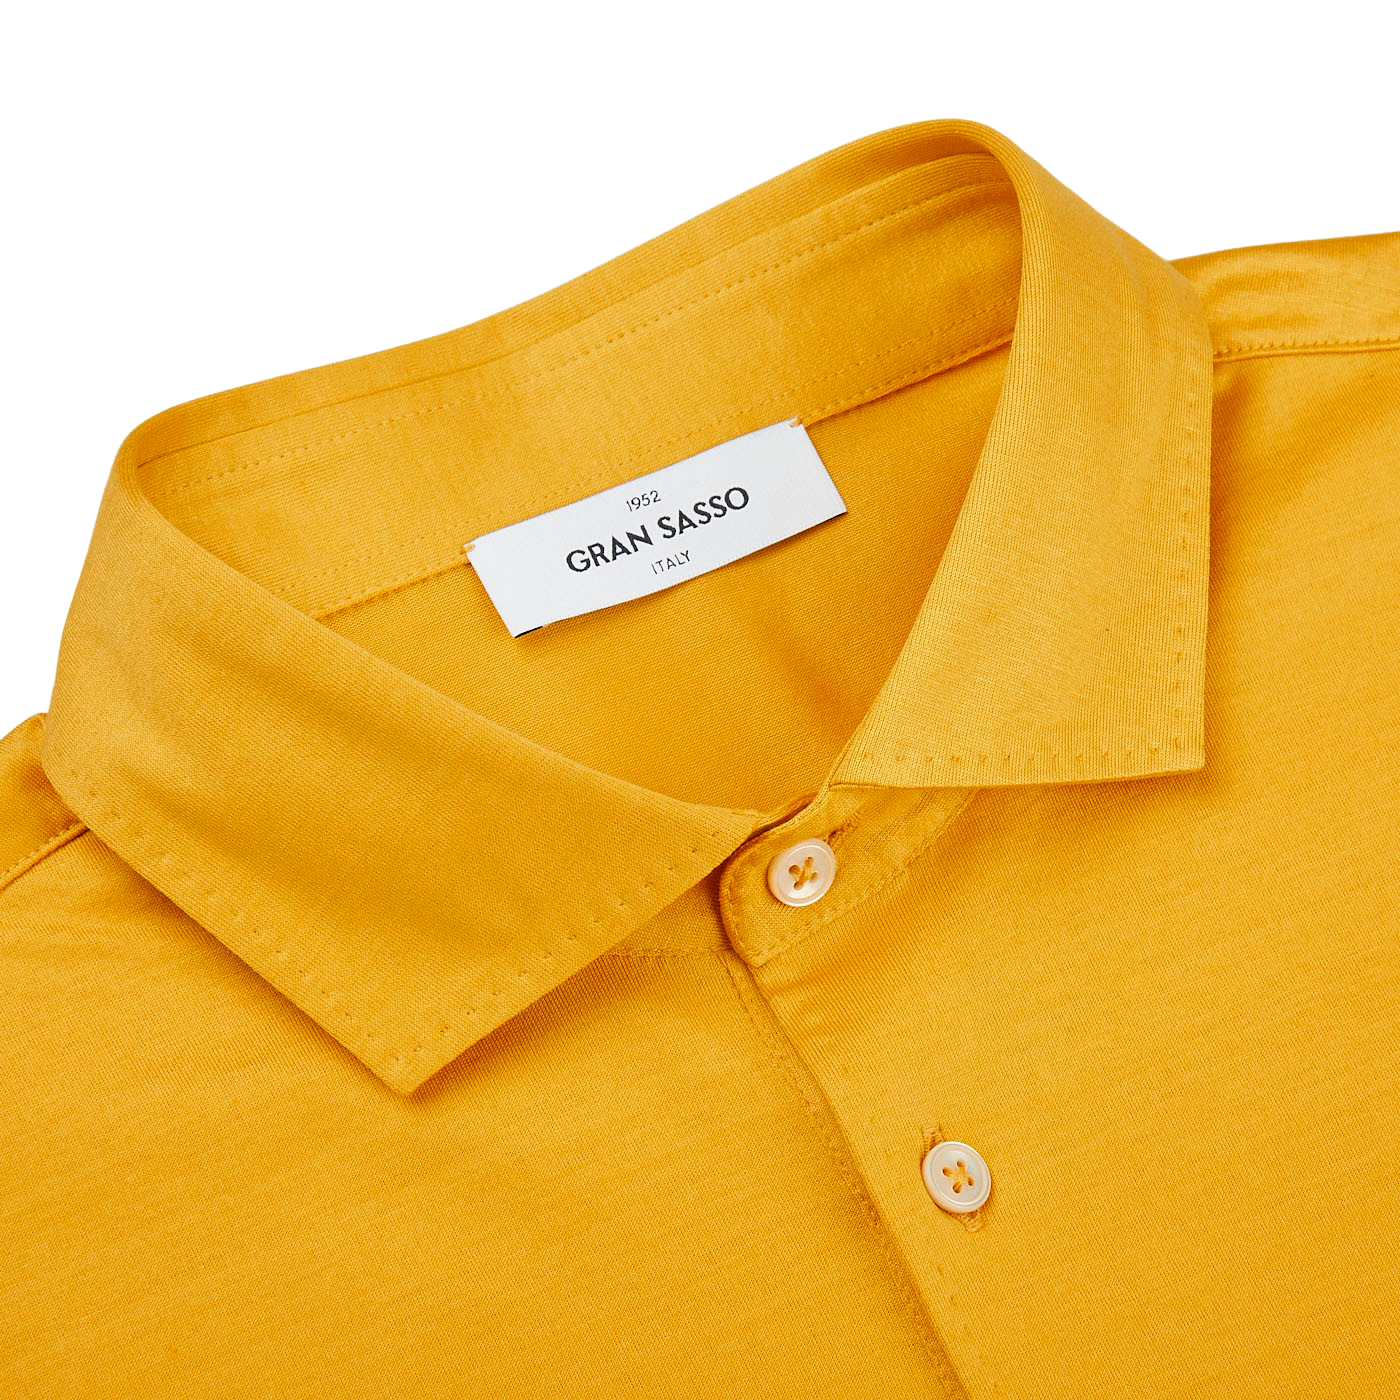 A seasonal Bright Yellow Cotton Filo Scozia polo shirt made of cotton with a label on the collar by Gran Sasso.